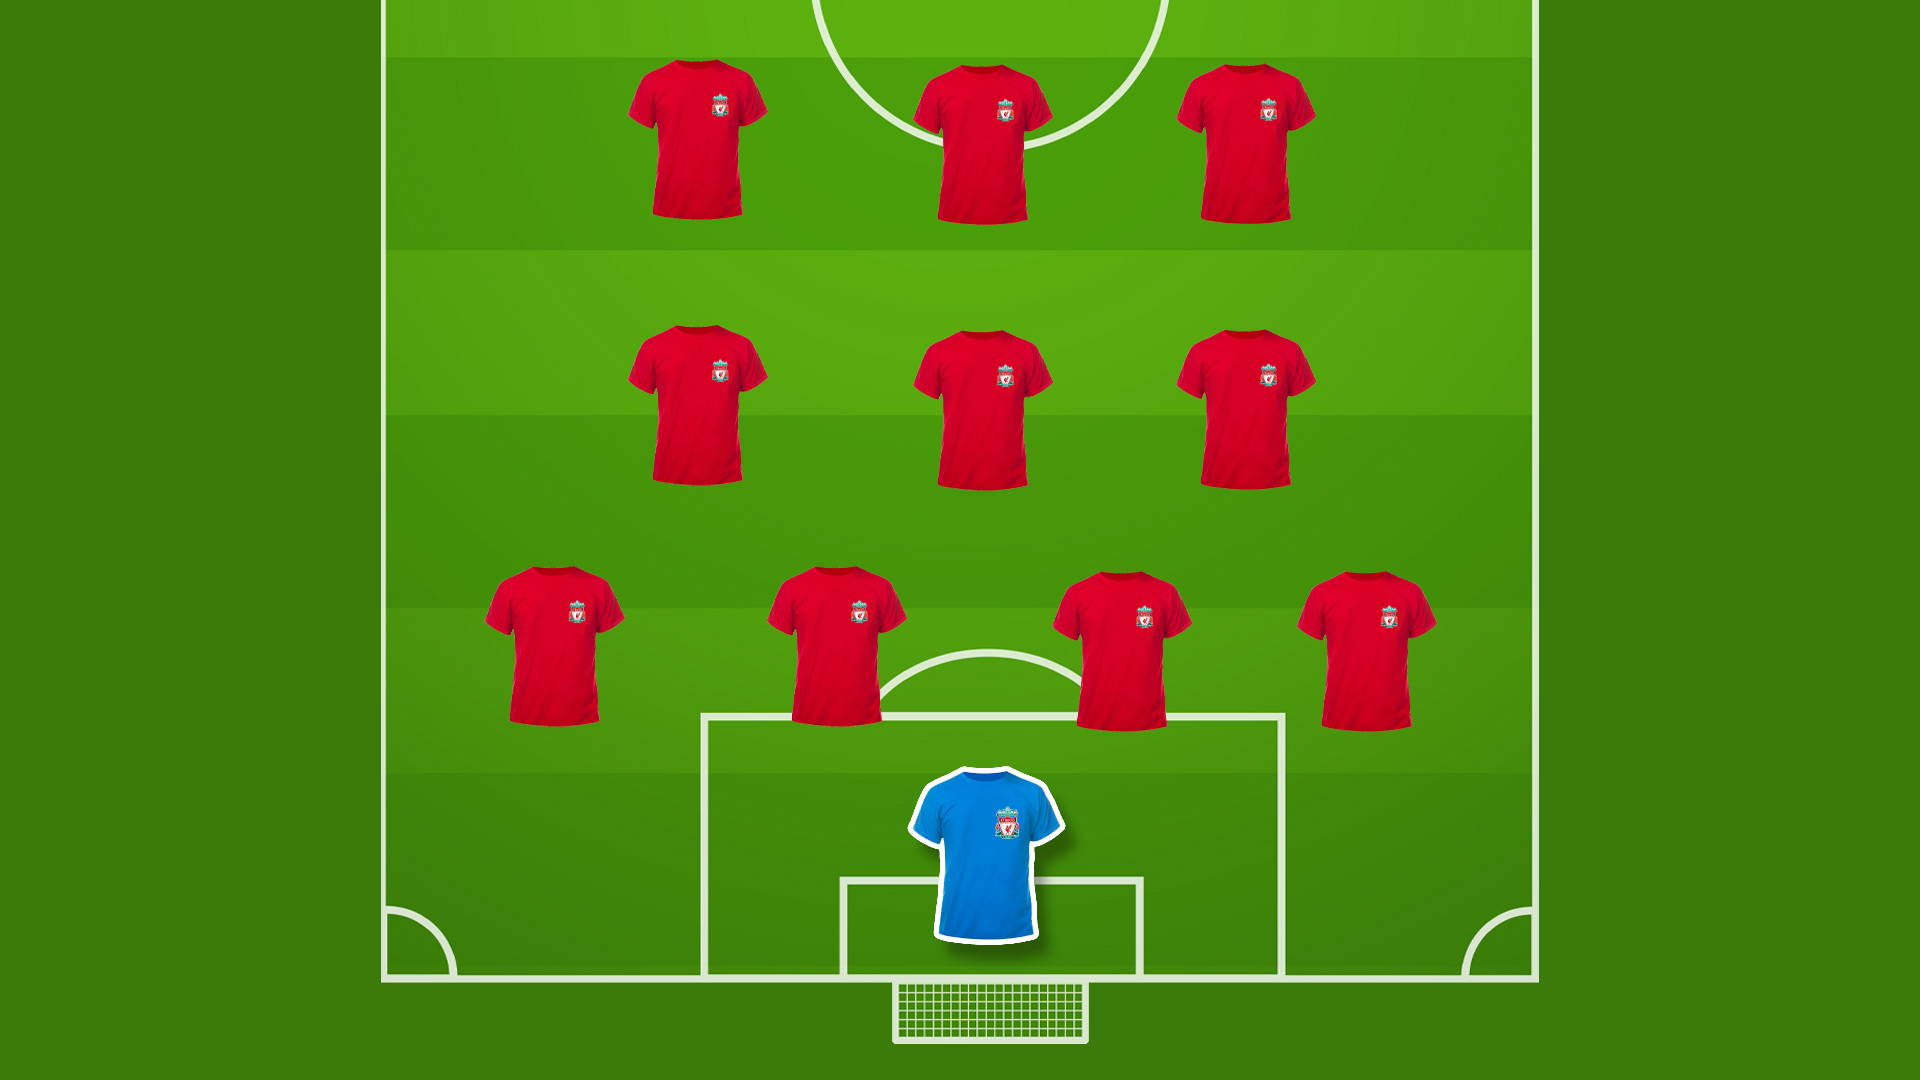 Liverpool 11 with goalkeeper highlighted